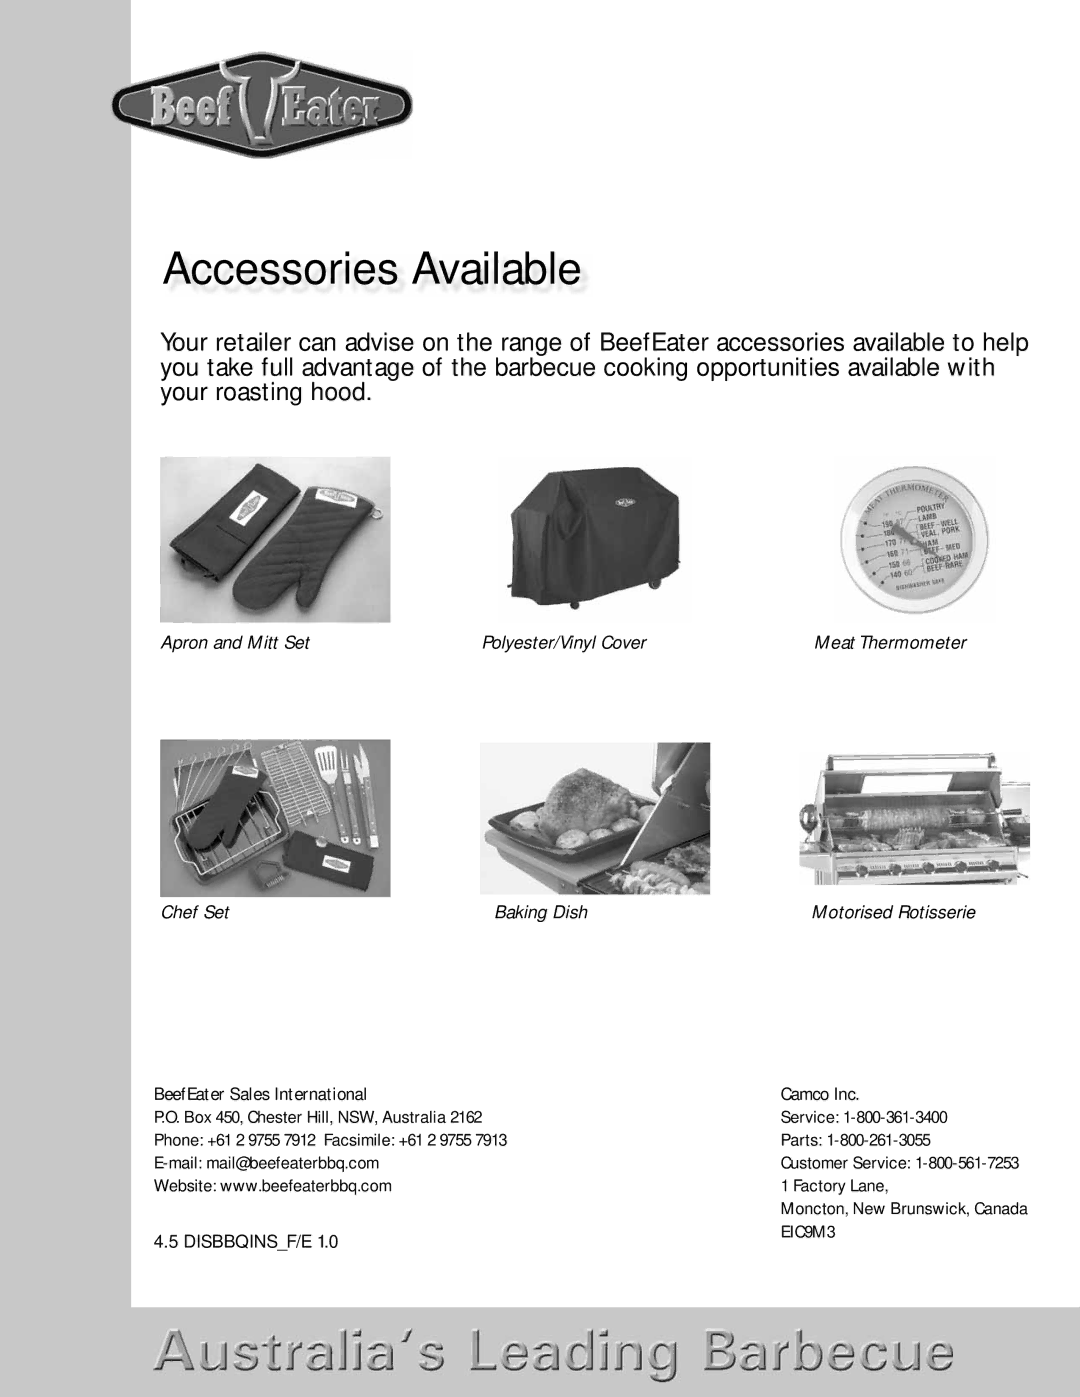 BeefEater Discovery Series manual Accessories Available, BeefEater Sales International Camco Inc 